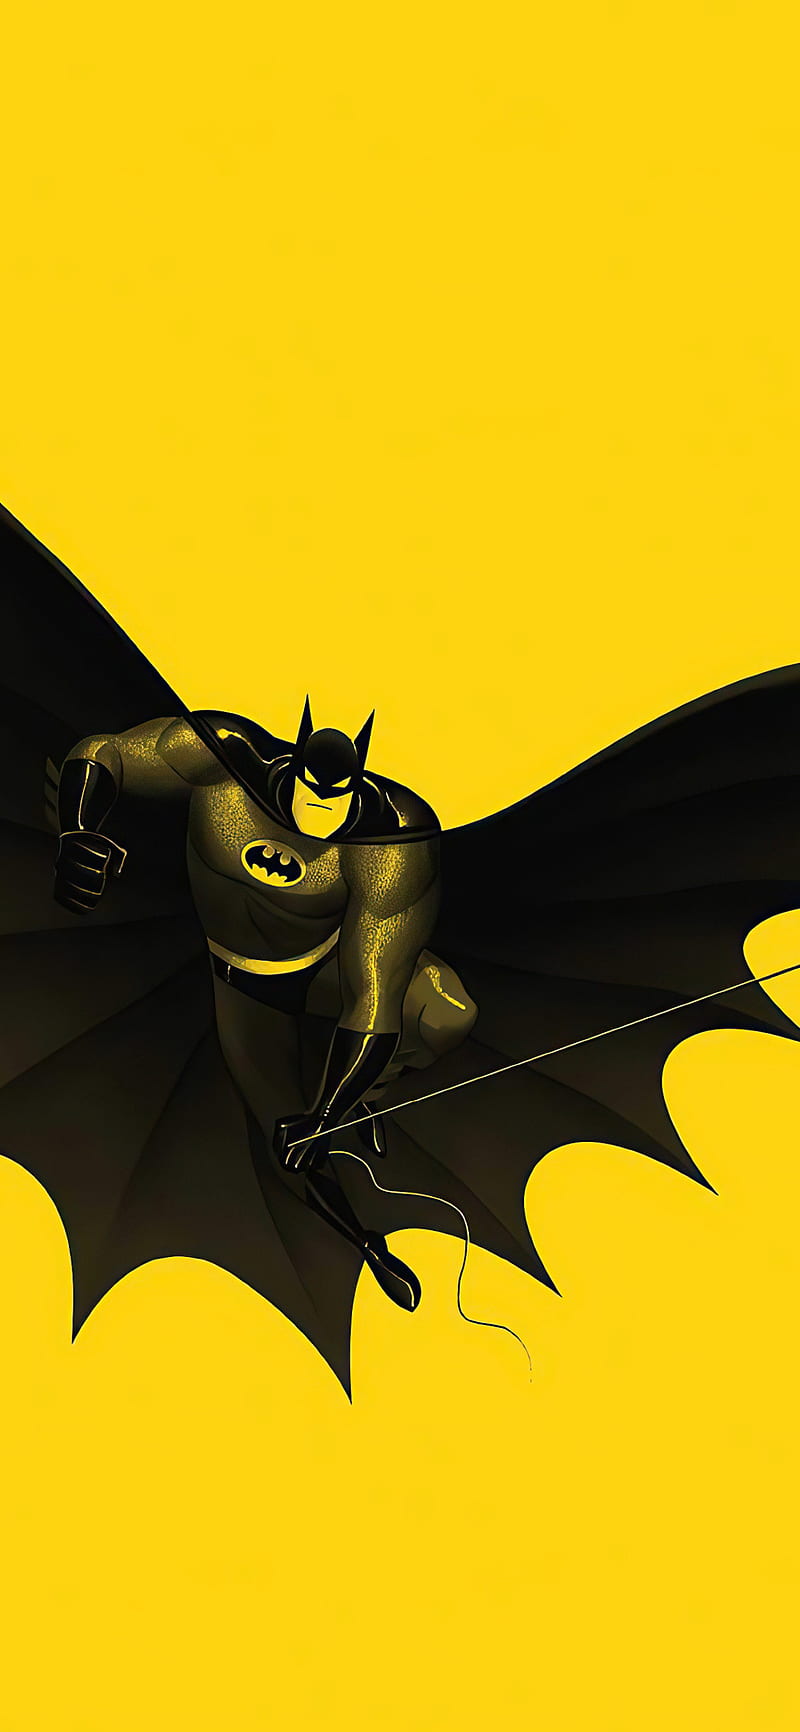 Best Batman wallpapers for your iPhone 5s, iPhone 5c, iPhone 5 and iPod  touch 5th generation - iOS Hacker